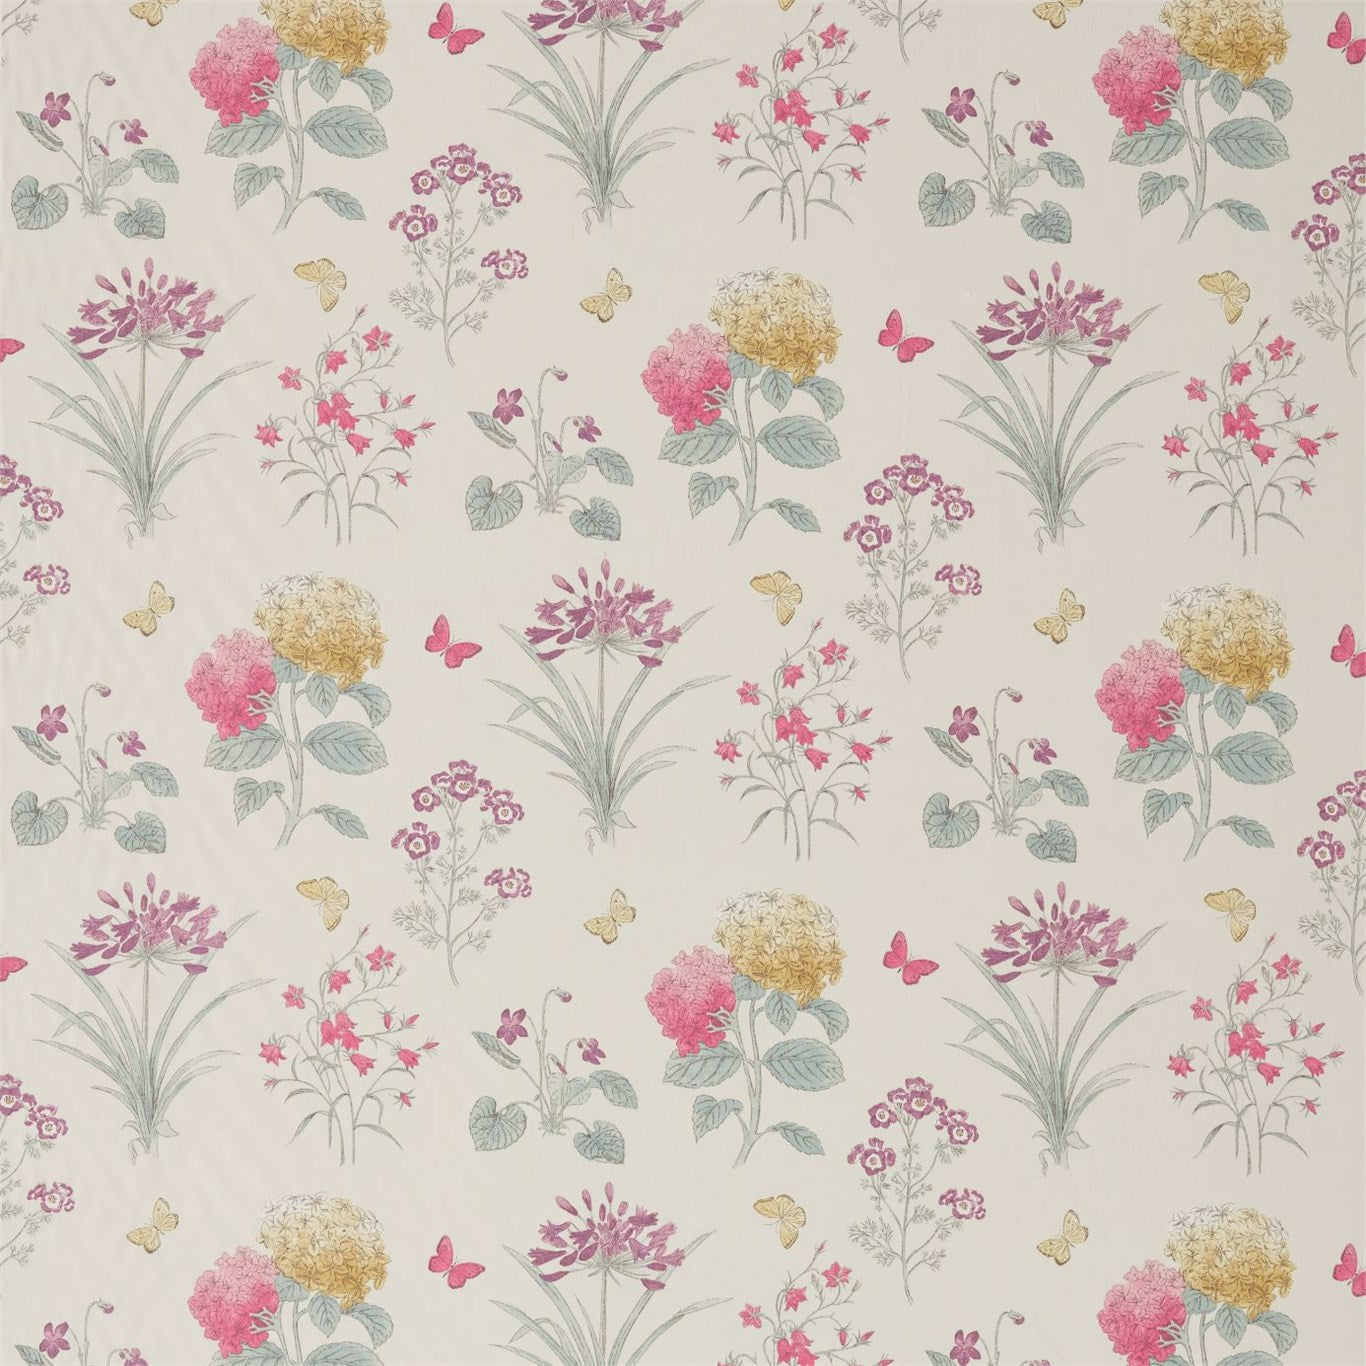 Harebells and Violets Peony/Bayleaf Fabric By Sanderson